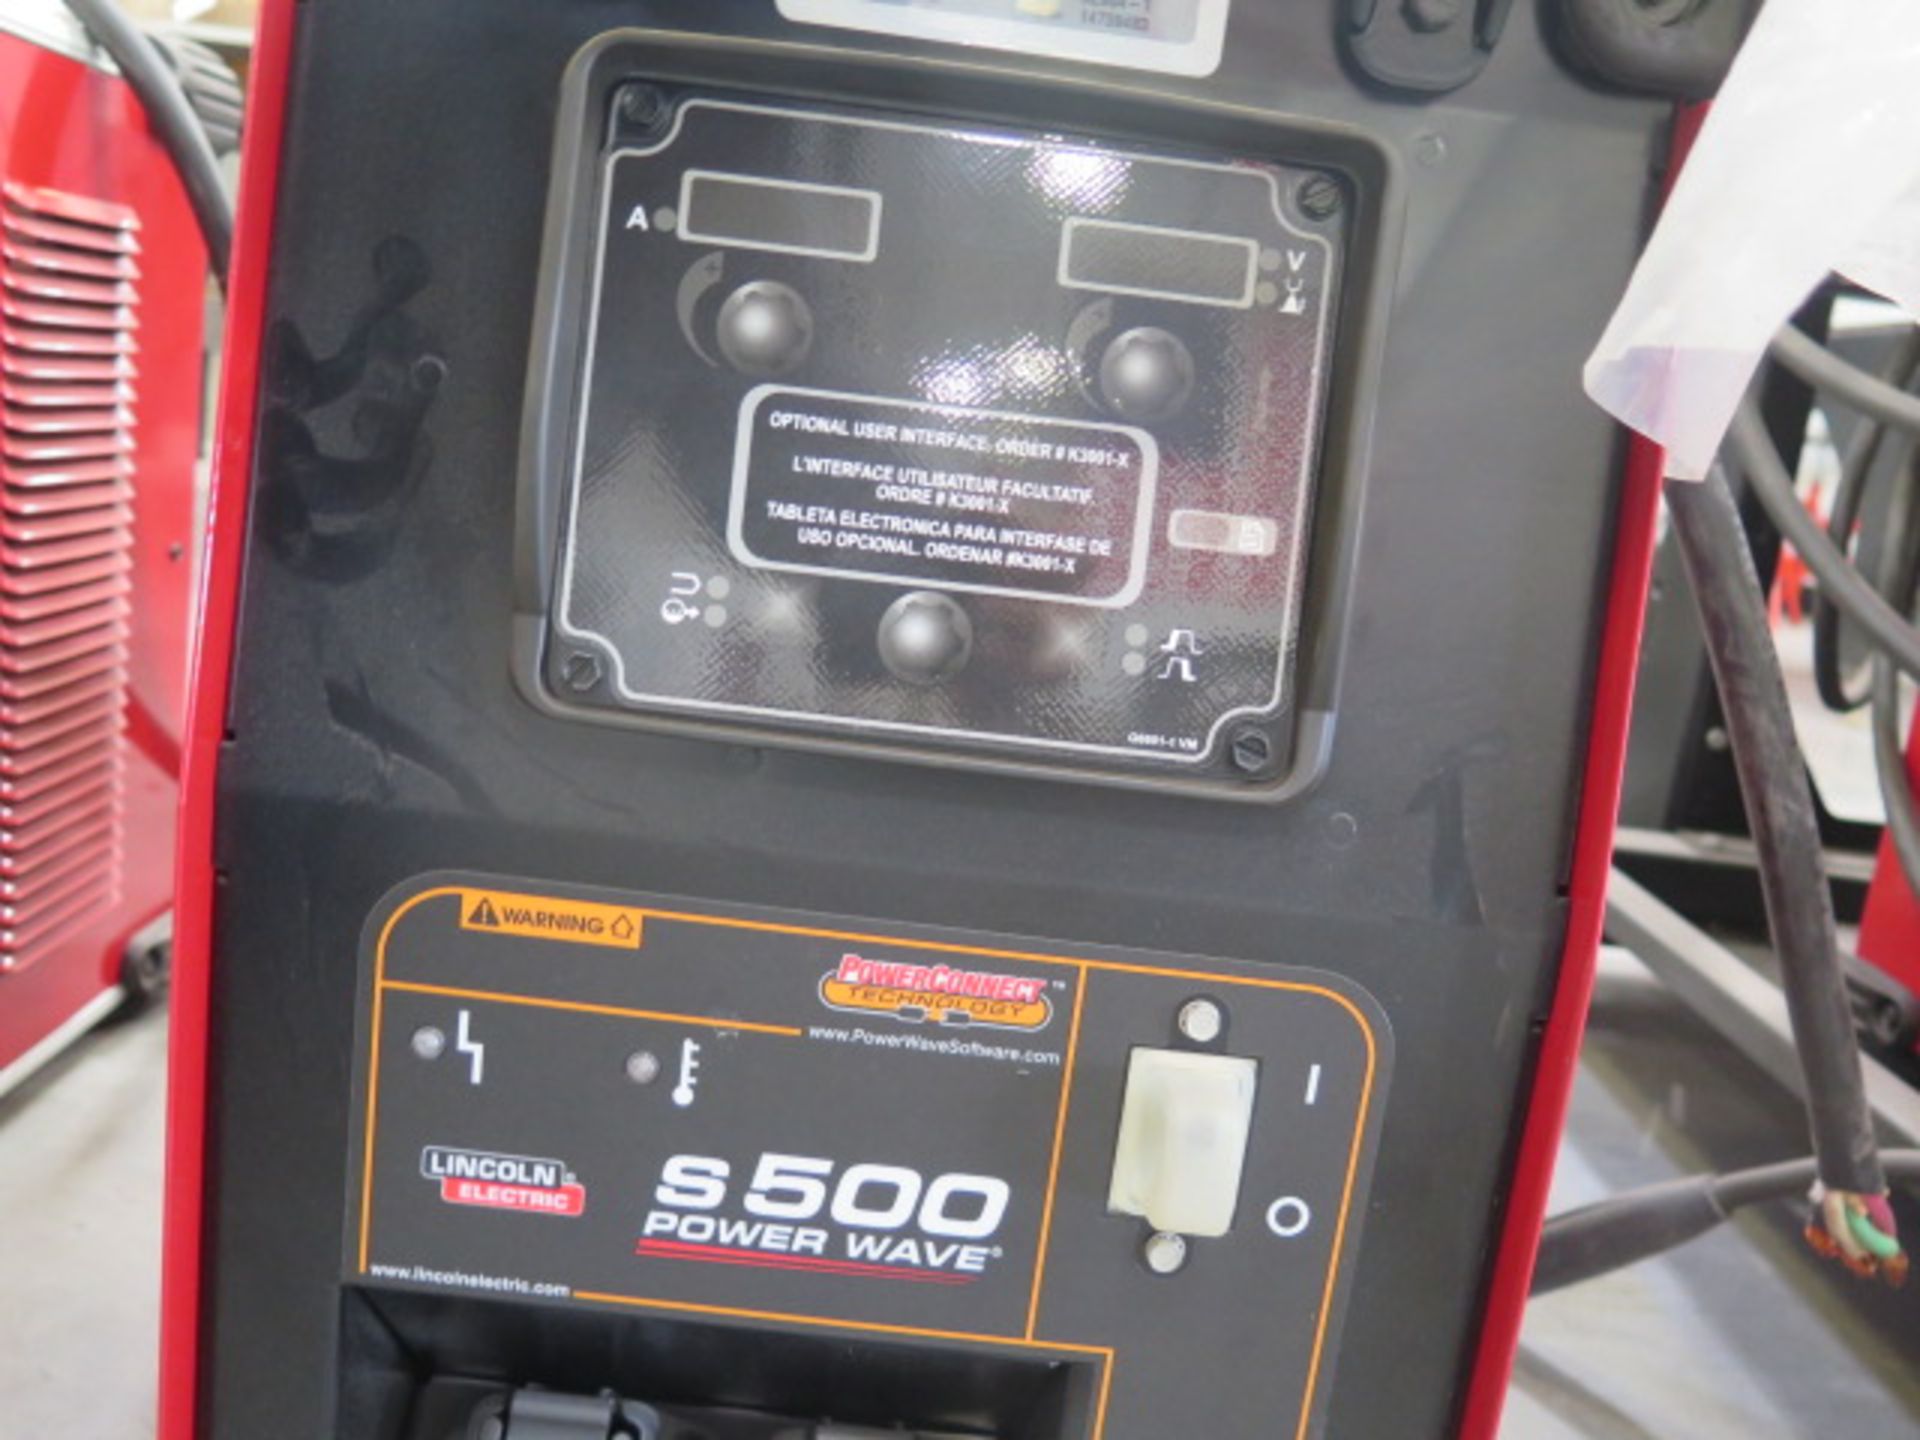 Lincoln S500 PowerWave Arc Welding Power Source (NEW) - Image 3 of 4